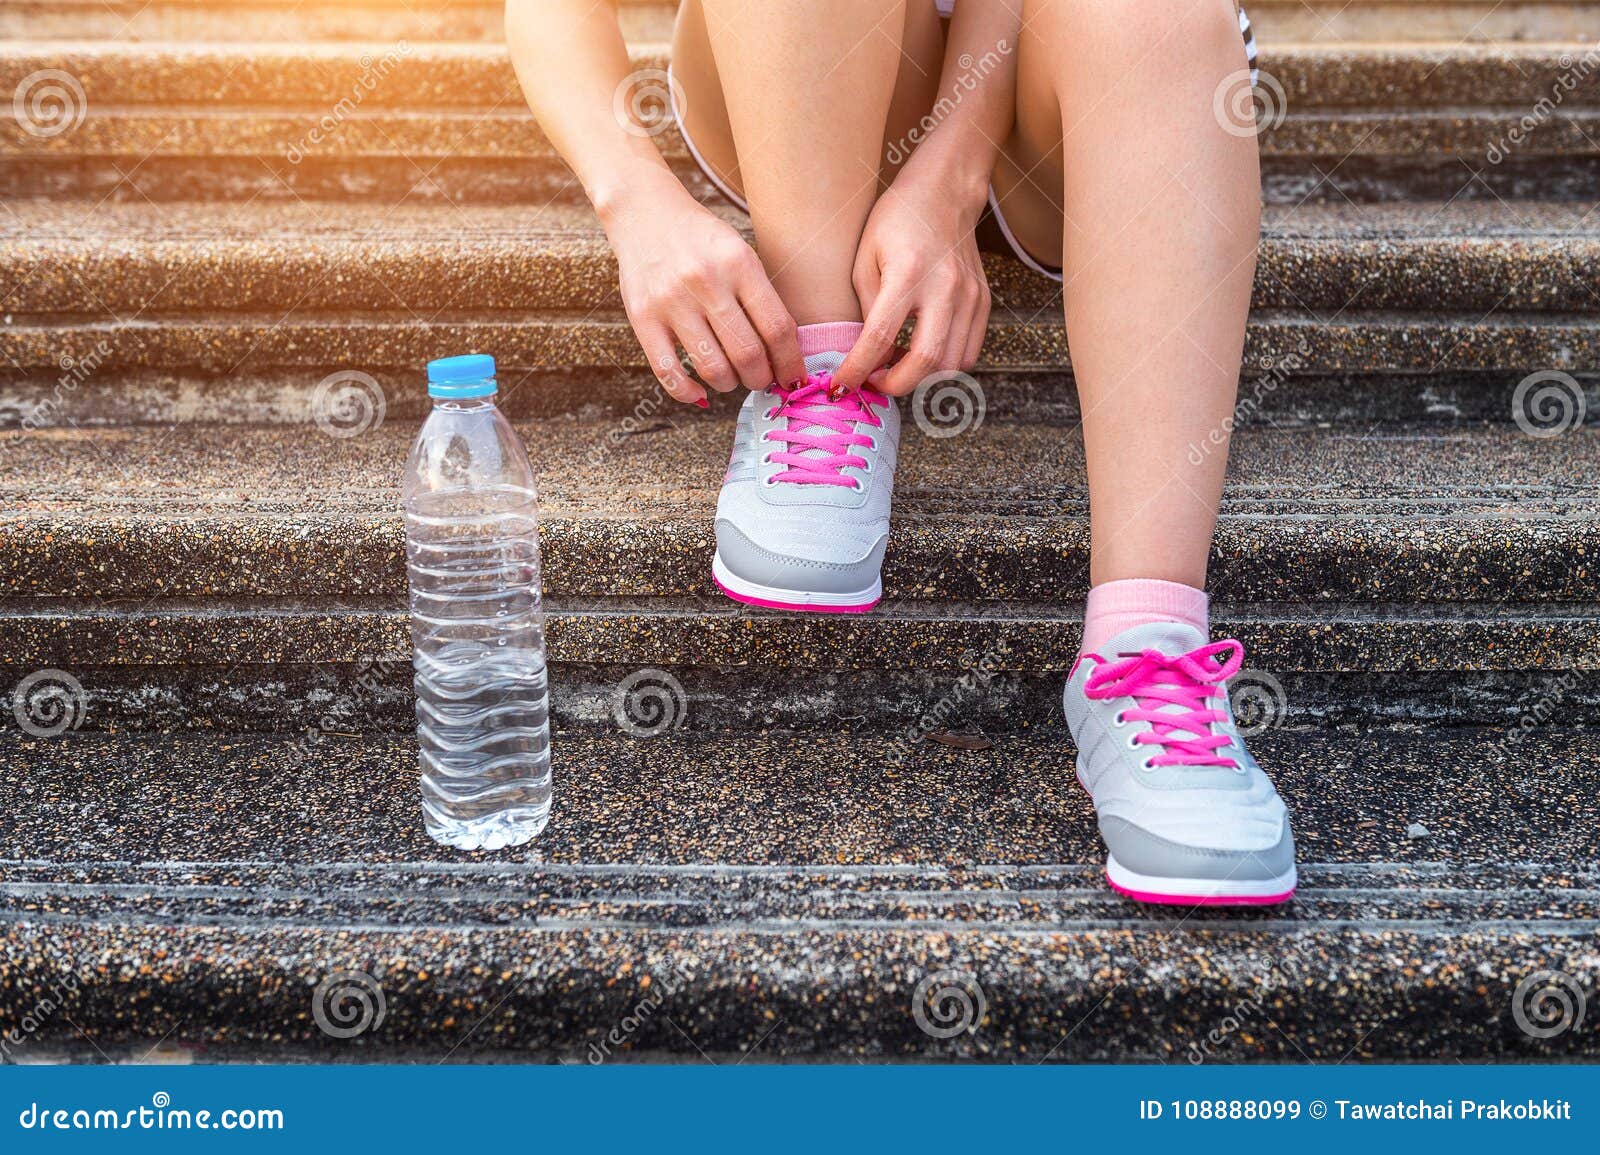 young woman runner tying shoelaces. exercise concept